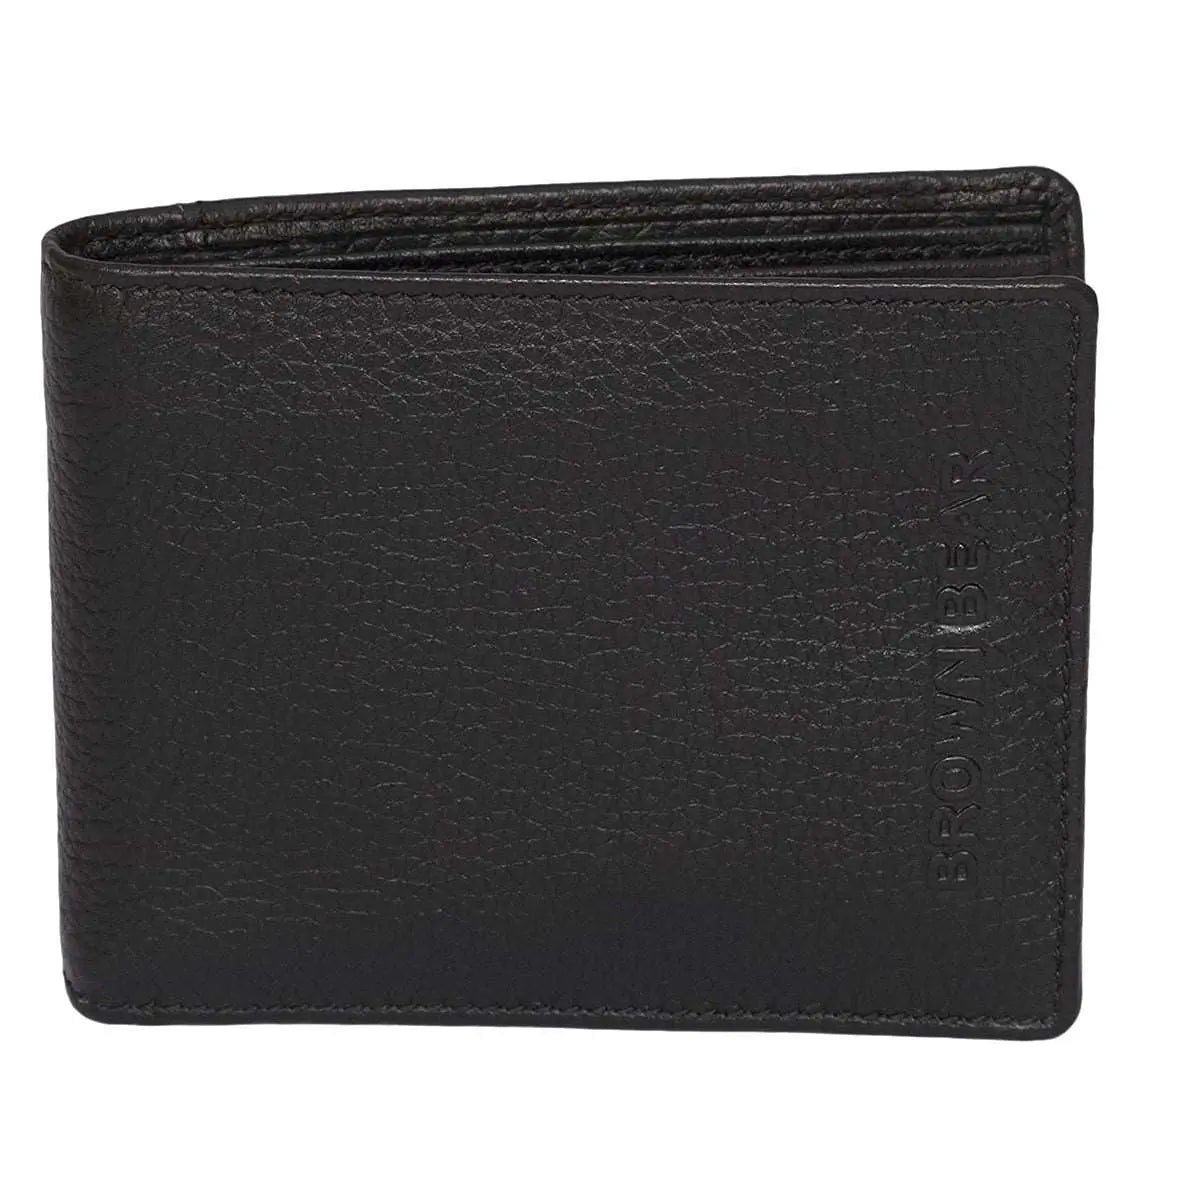 Mini Wallet for Men’s with Pocket in Genuine Leather - Brown Bear